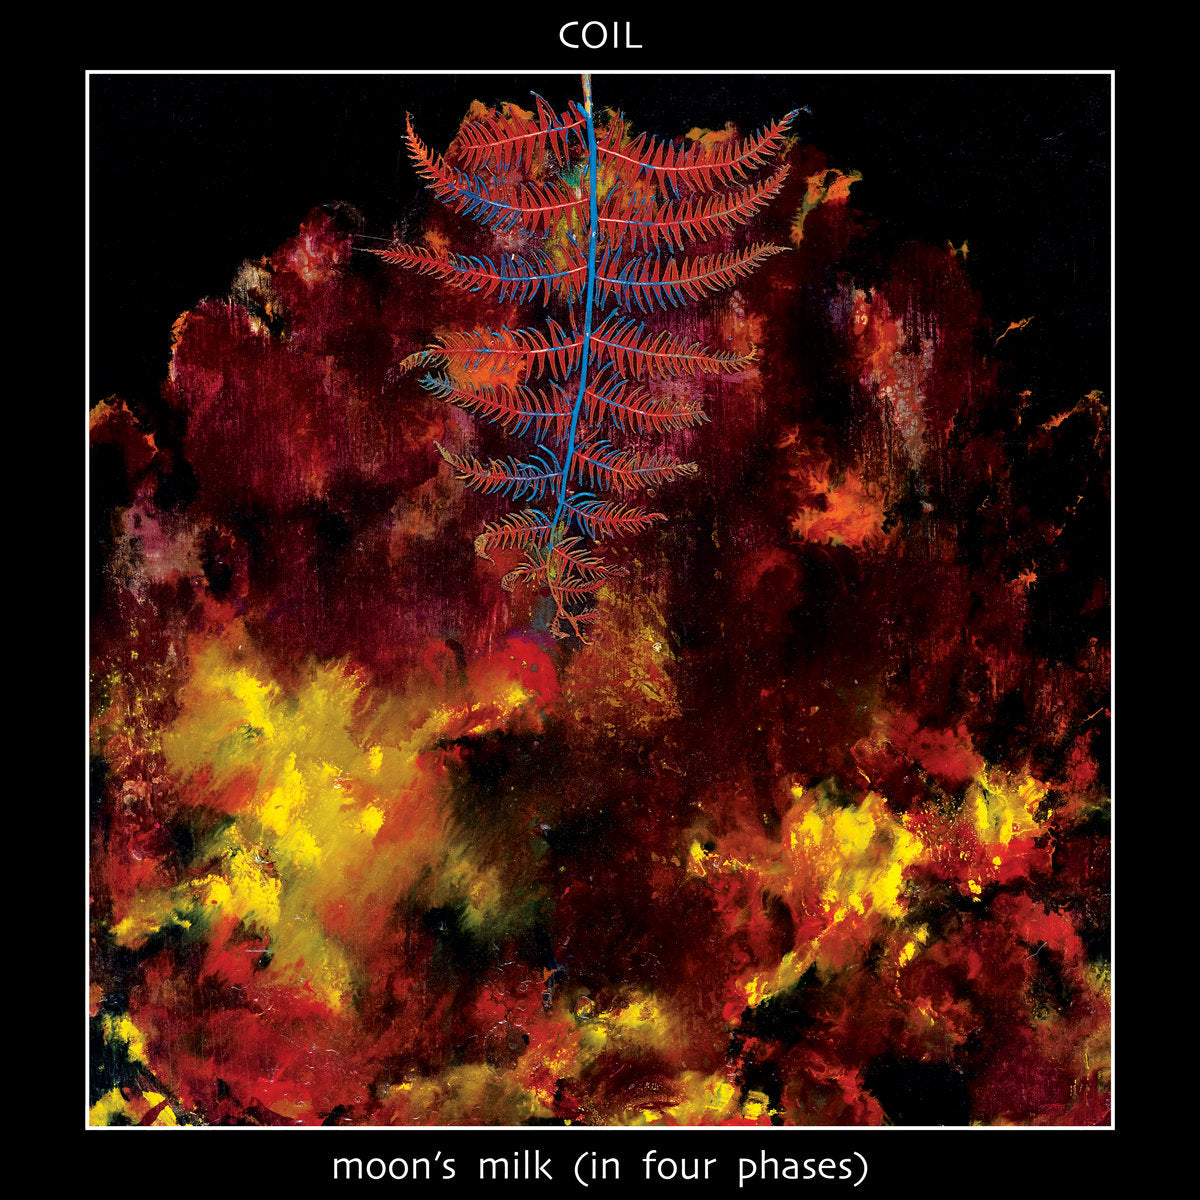 COIL "Moon's Milk (In Four Phases)" 3xLP